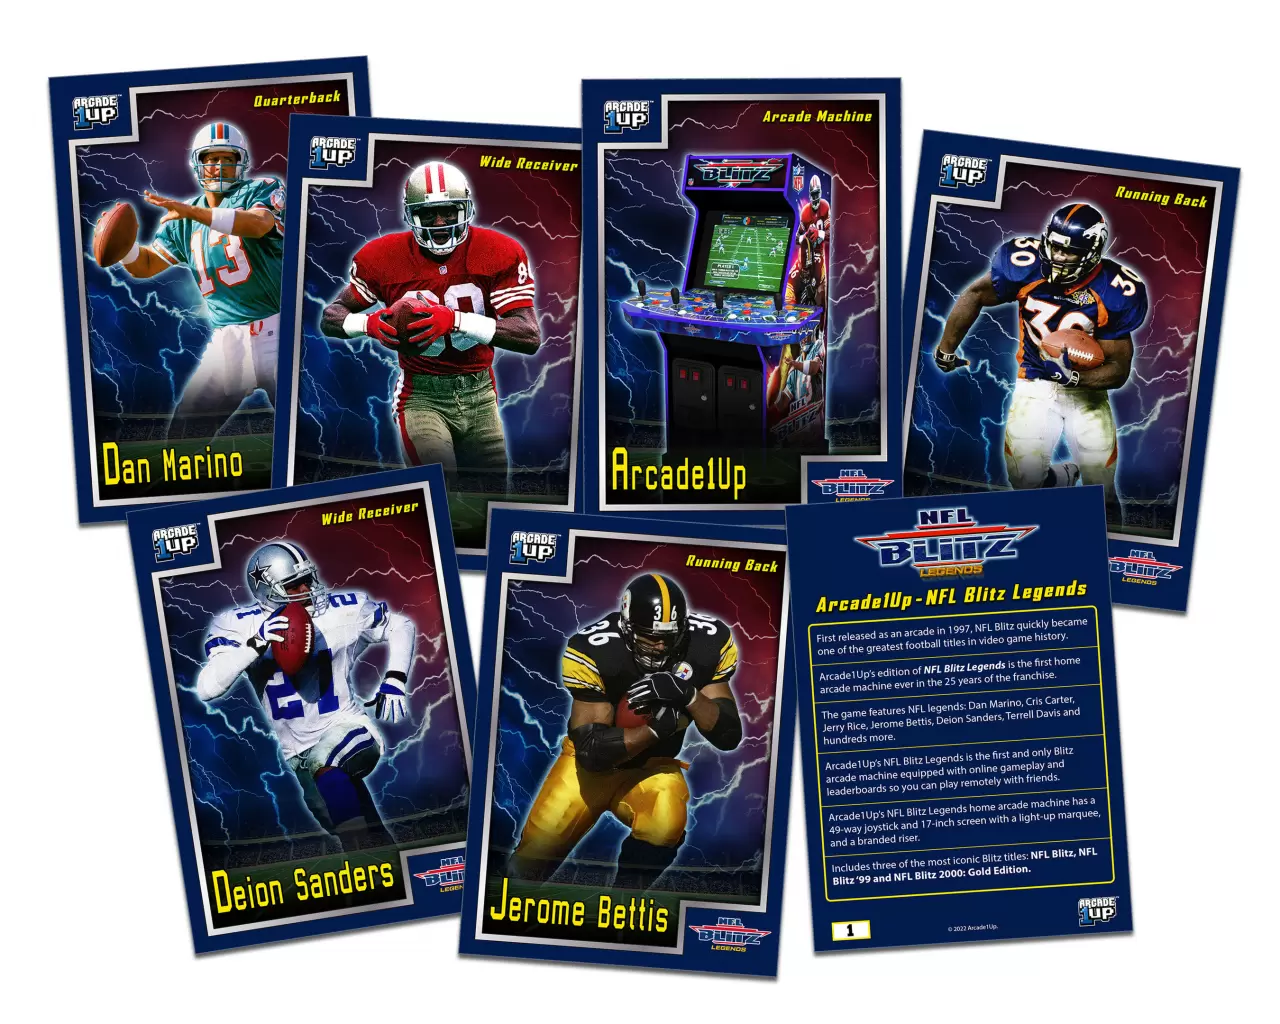 NFL Blitz Legends by Arcade1Up is now available